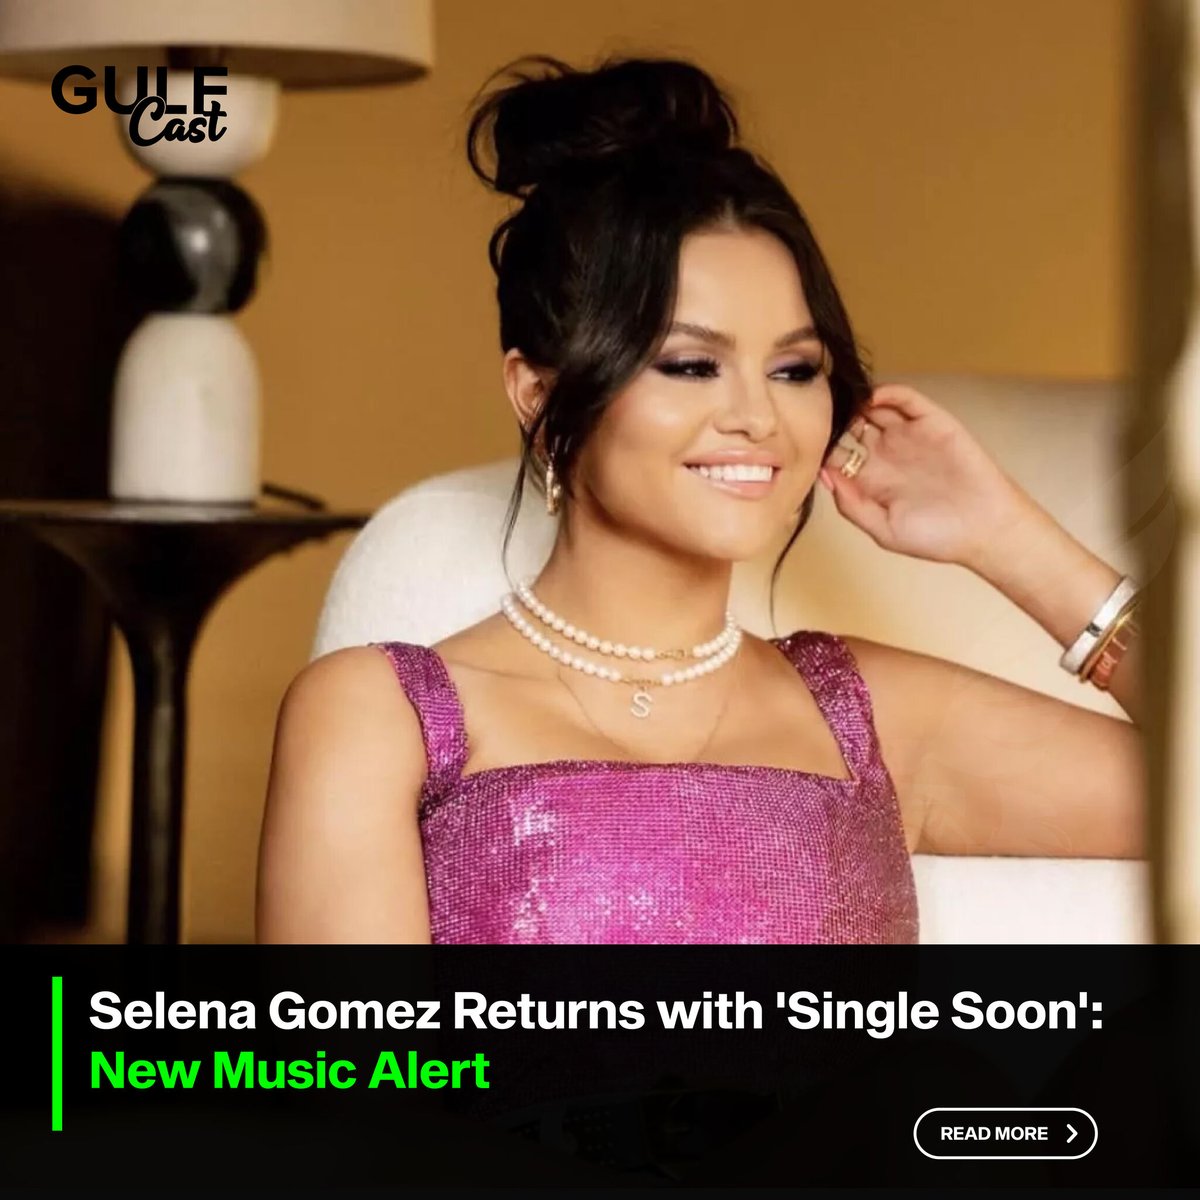 🎶 Exciting News! 🎶 Selena Gomez is dropping her first new music in nearly a year with 'Single Soon'! released on August 25 via Interscope Records.
#SelenaGomez #NewMusicAlert #news #fy #gulfcast #musicvibes #newalbumrelease #musicislife #singlesoon